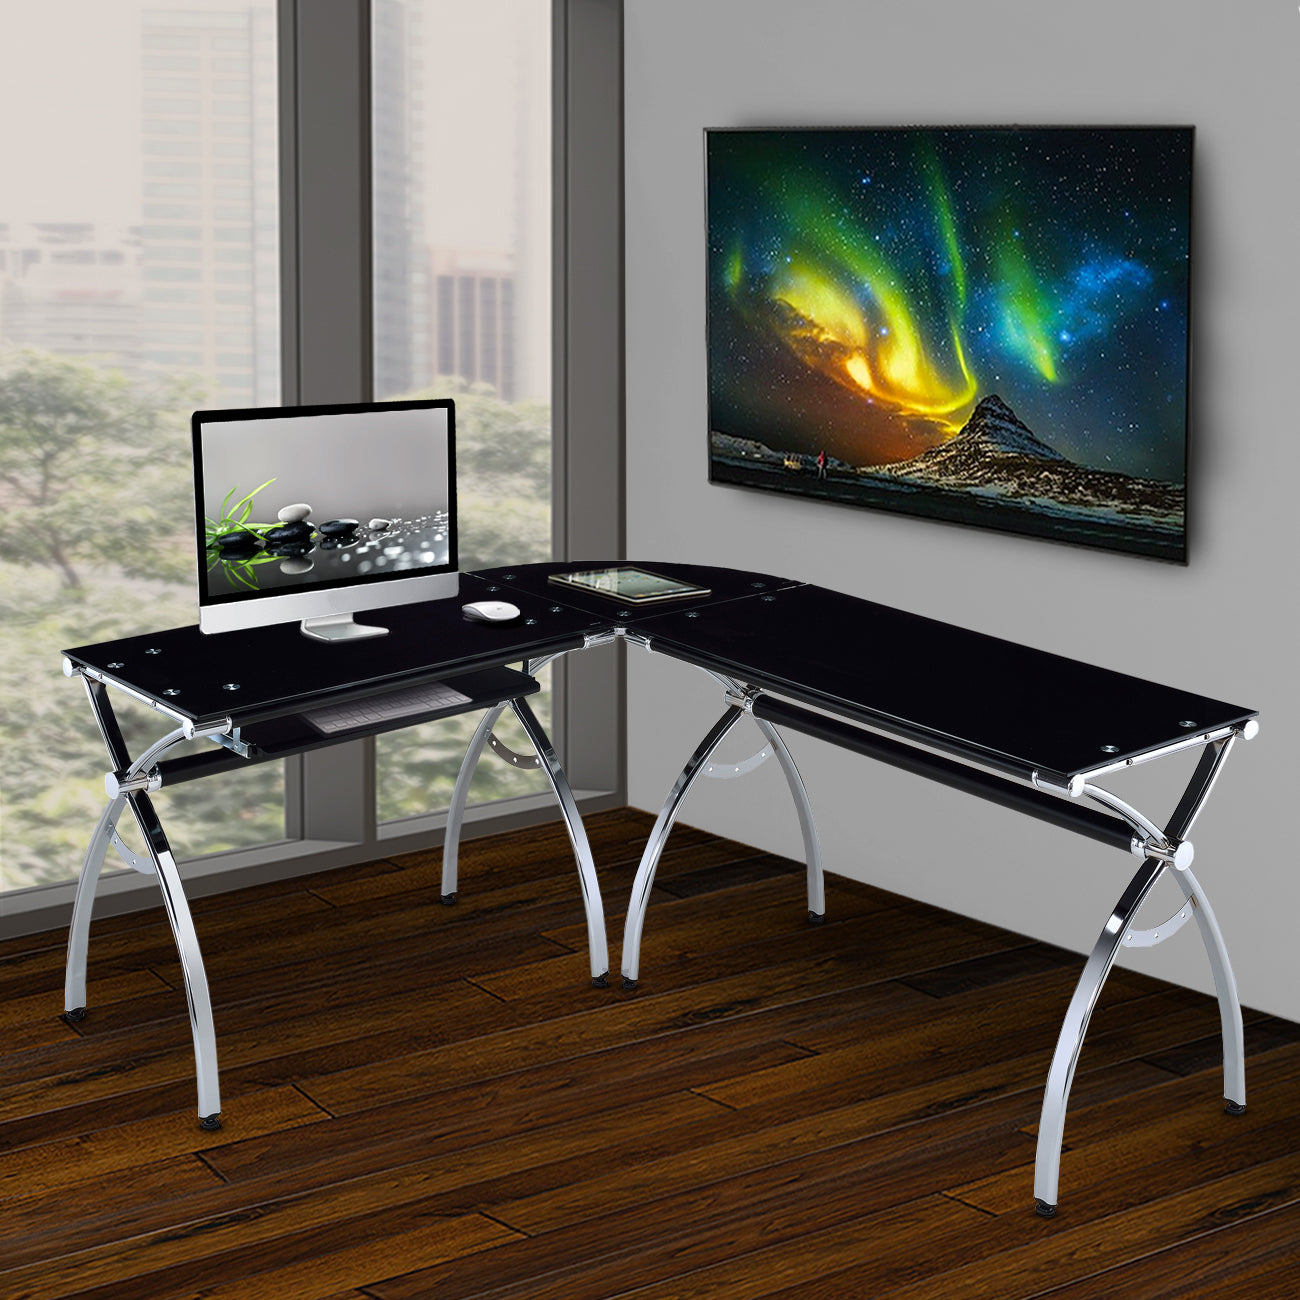 L-Shaped Colored Tempered Glass Top Corner Desk with Pull Out Keyboard Tray (Black)